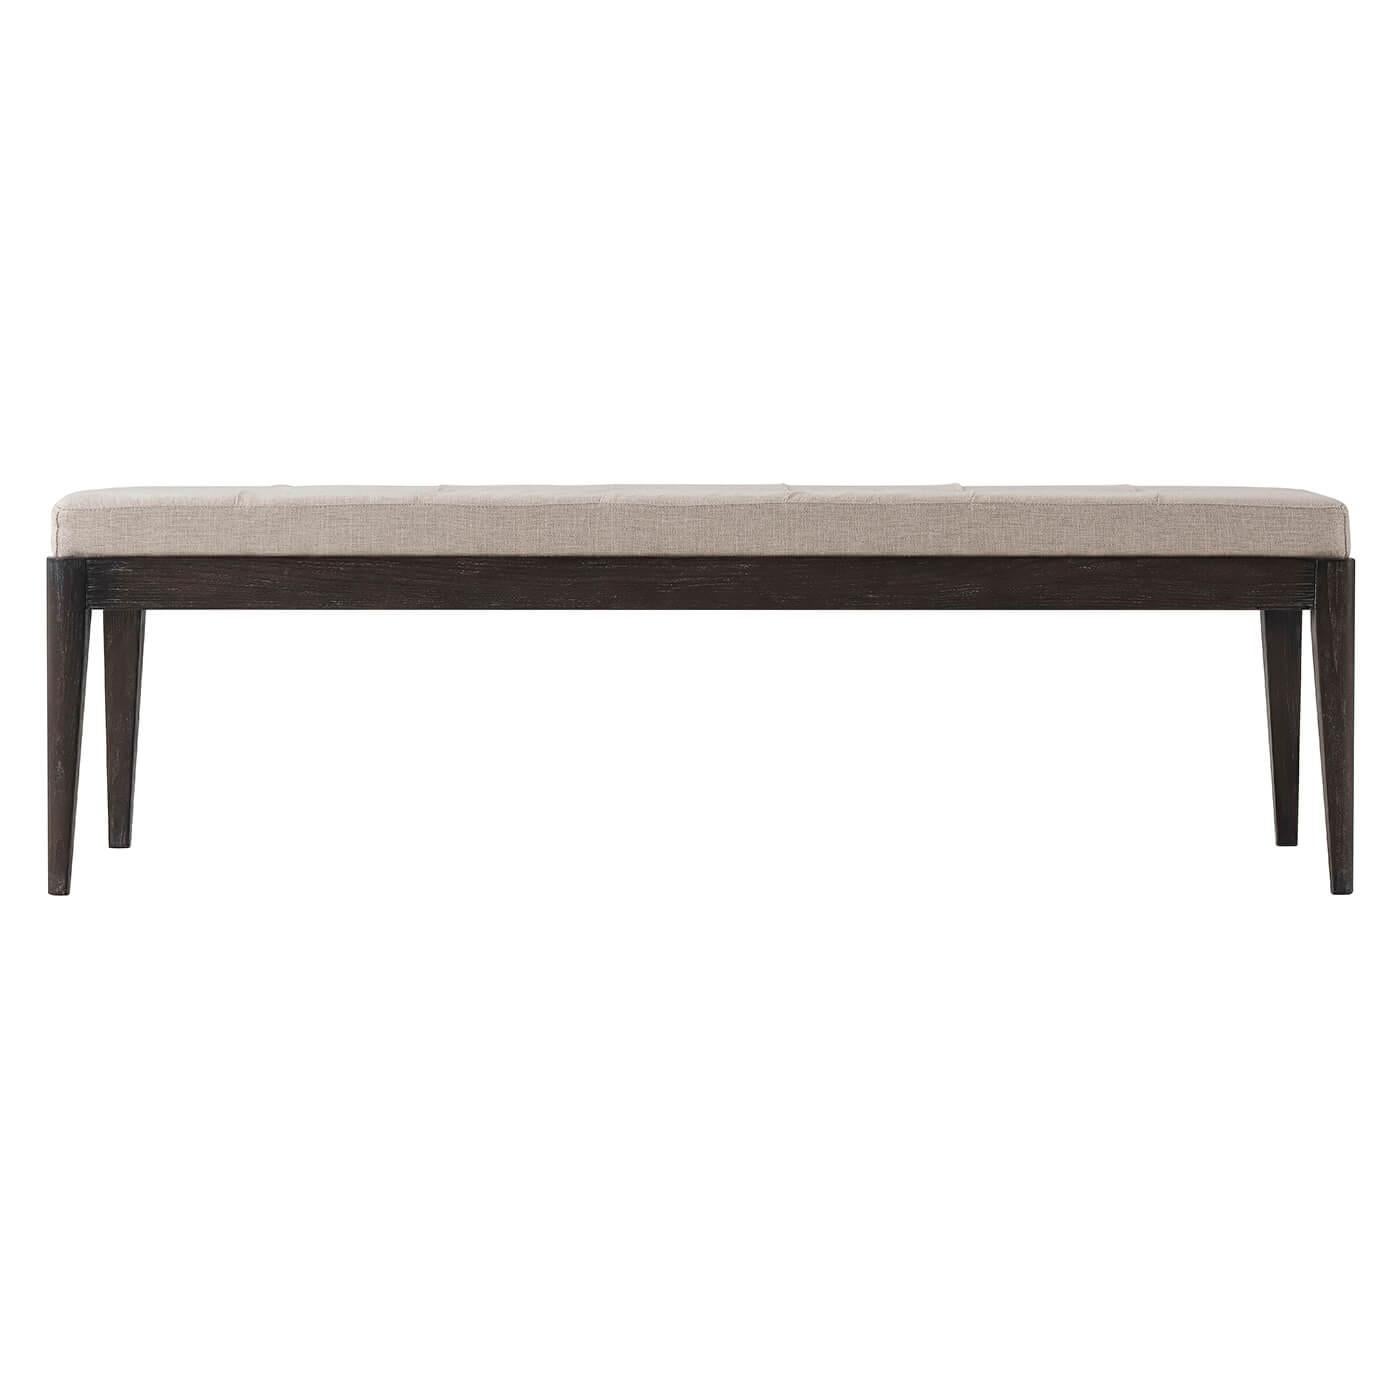 Midcentury tufted bench midcentury style bench with a biscuit tufted boxed seat cushion on a stained solid beach frame and rails with tapered legs.

Dimensions: 62